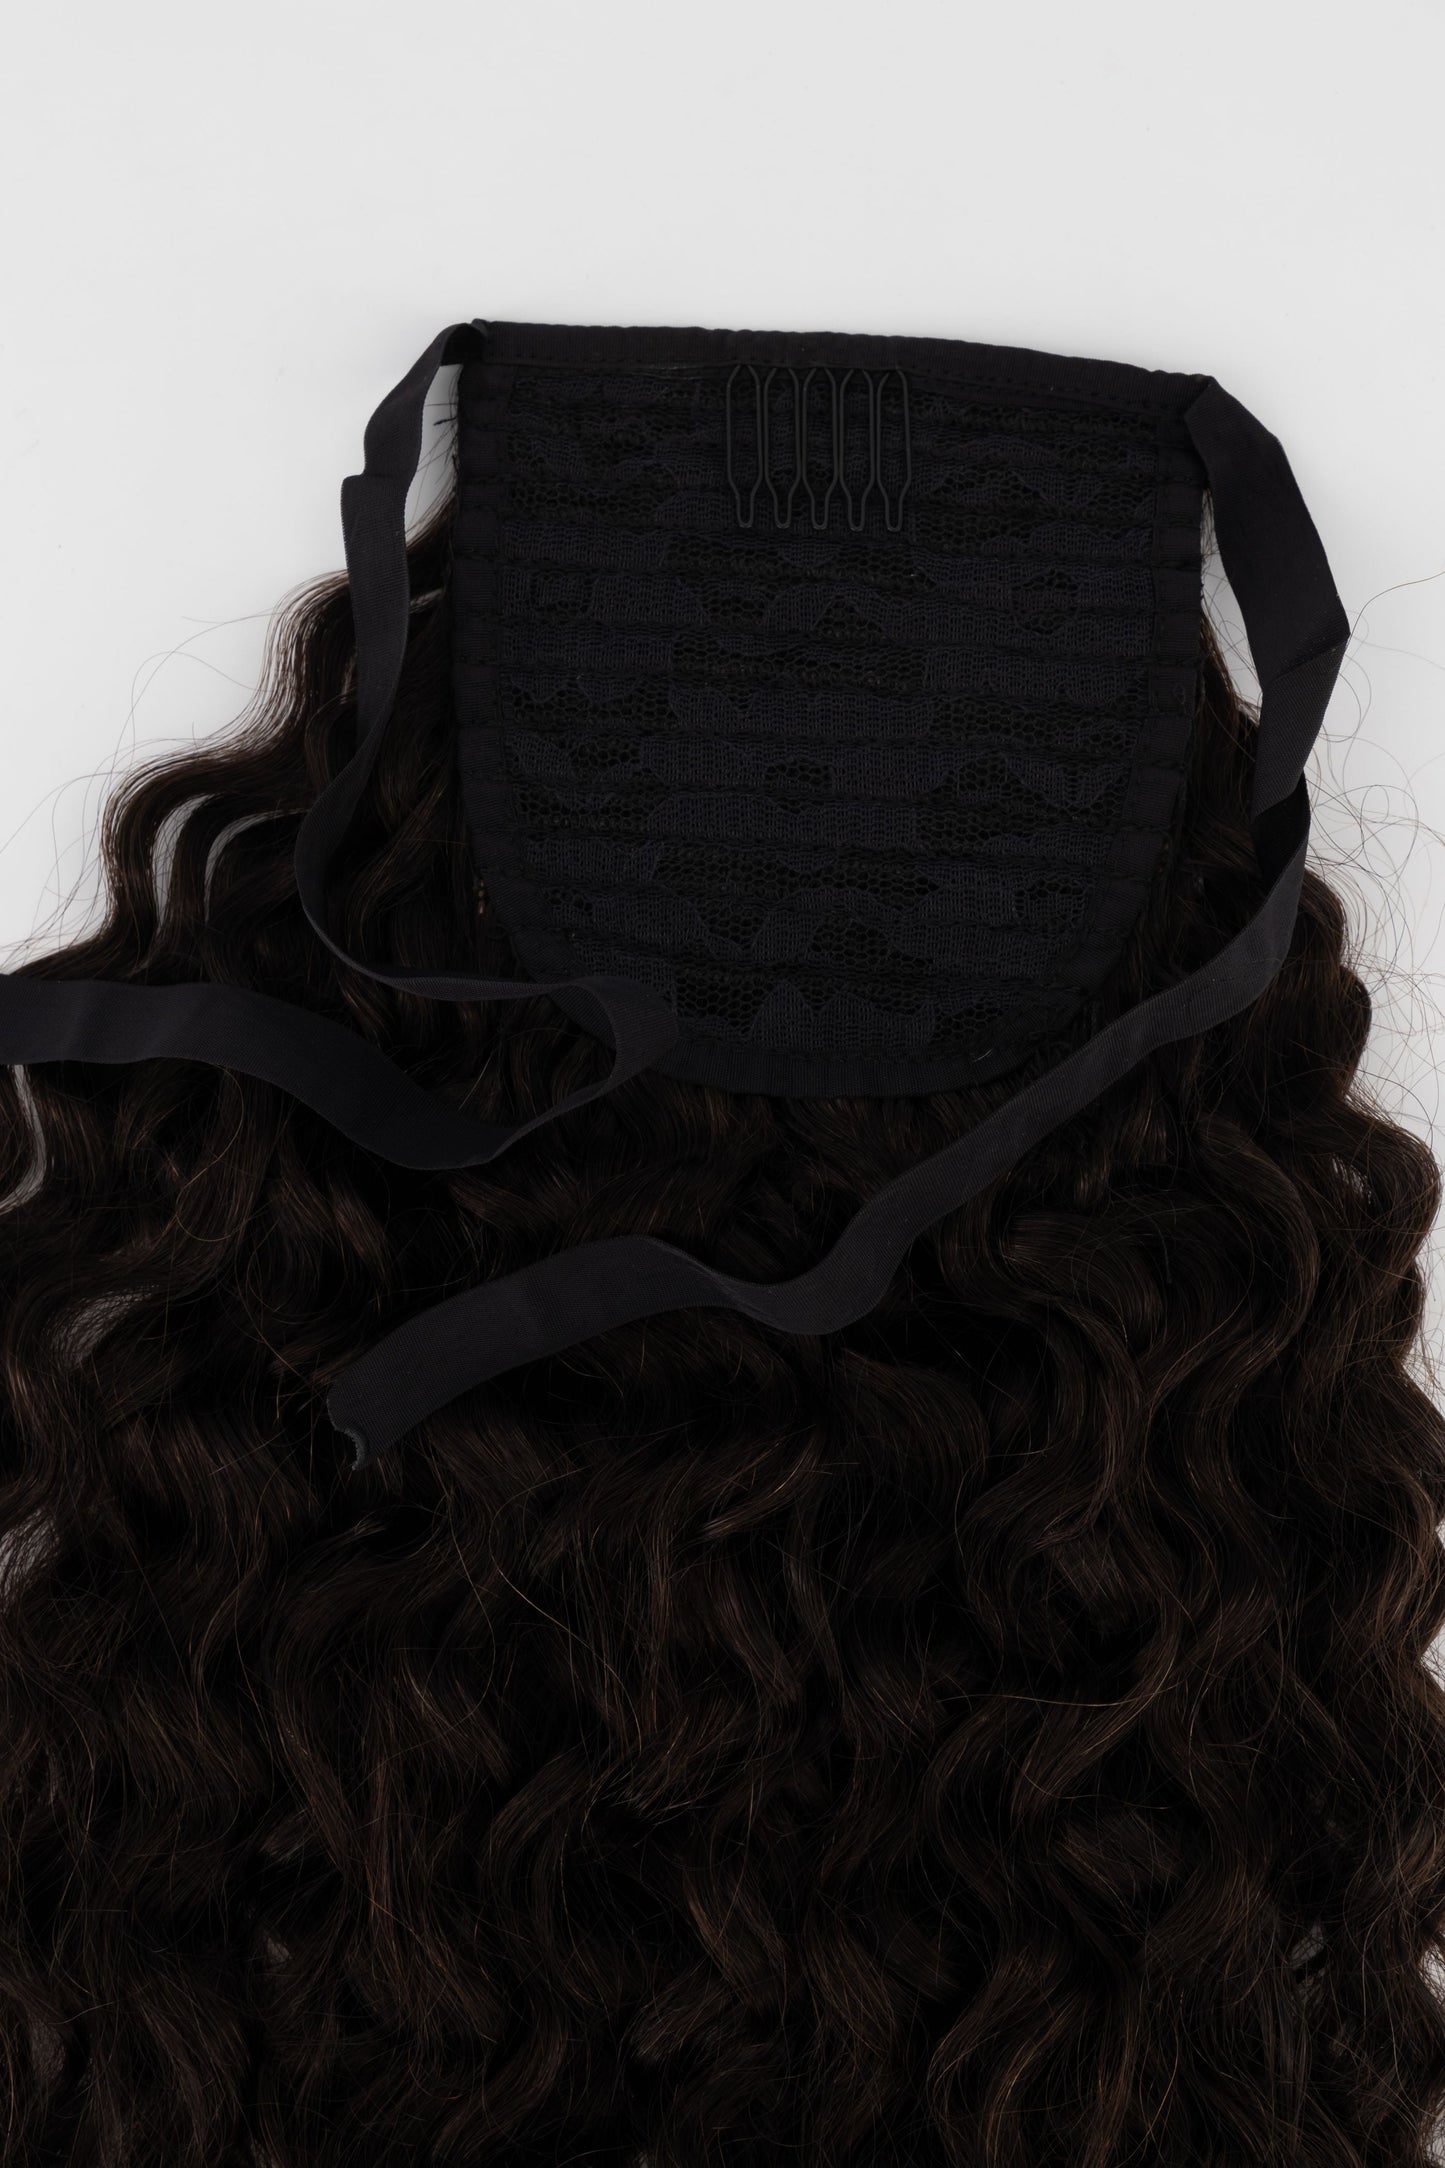 Brown Black Curly 20inch Clip in Ponytail